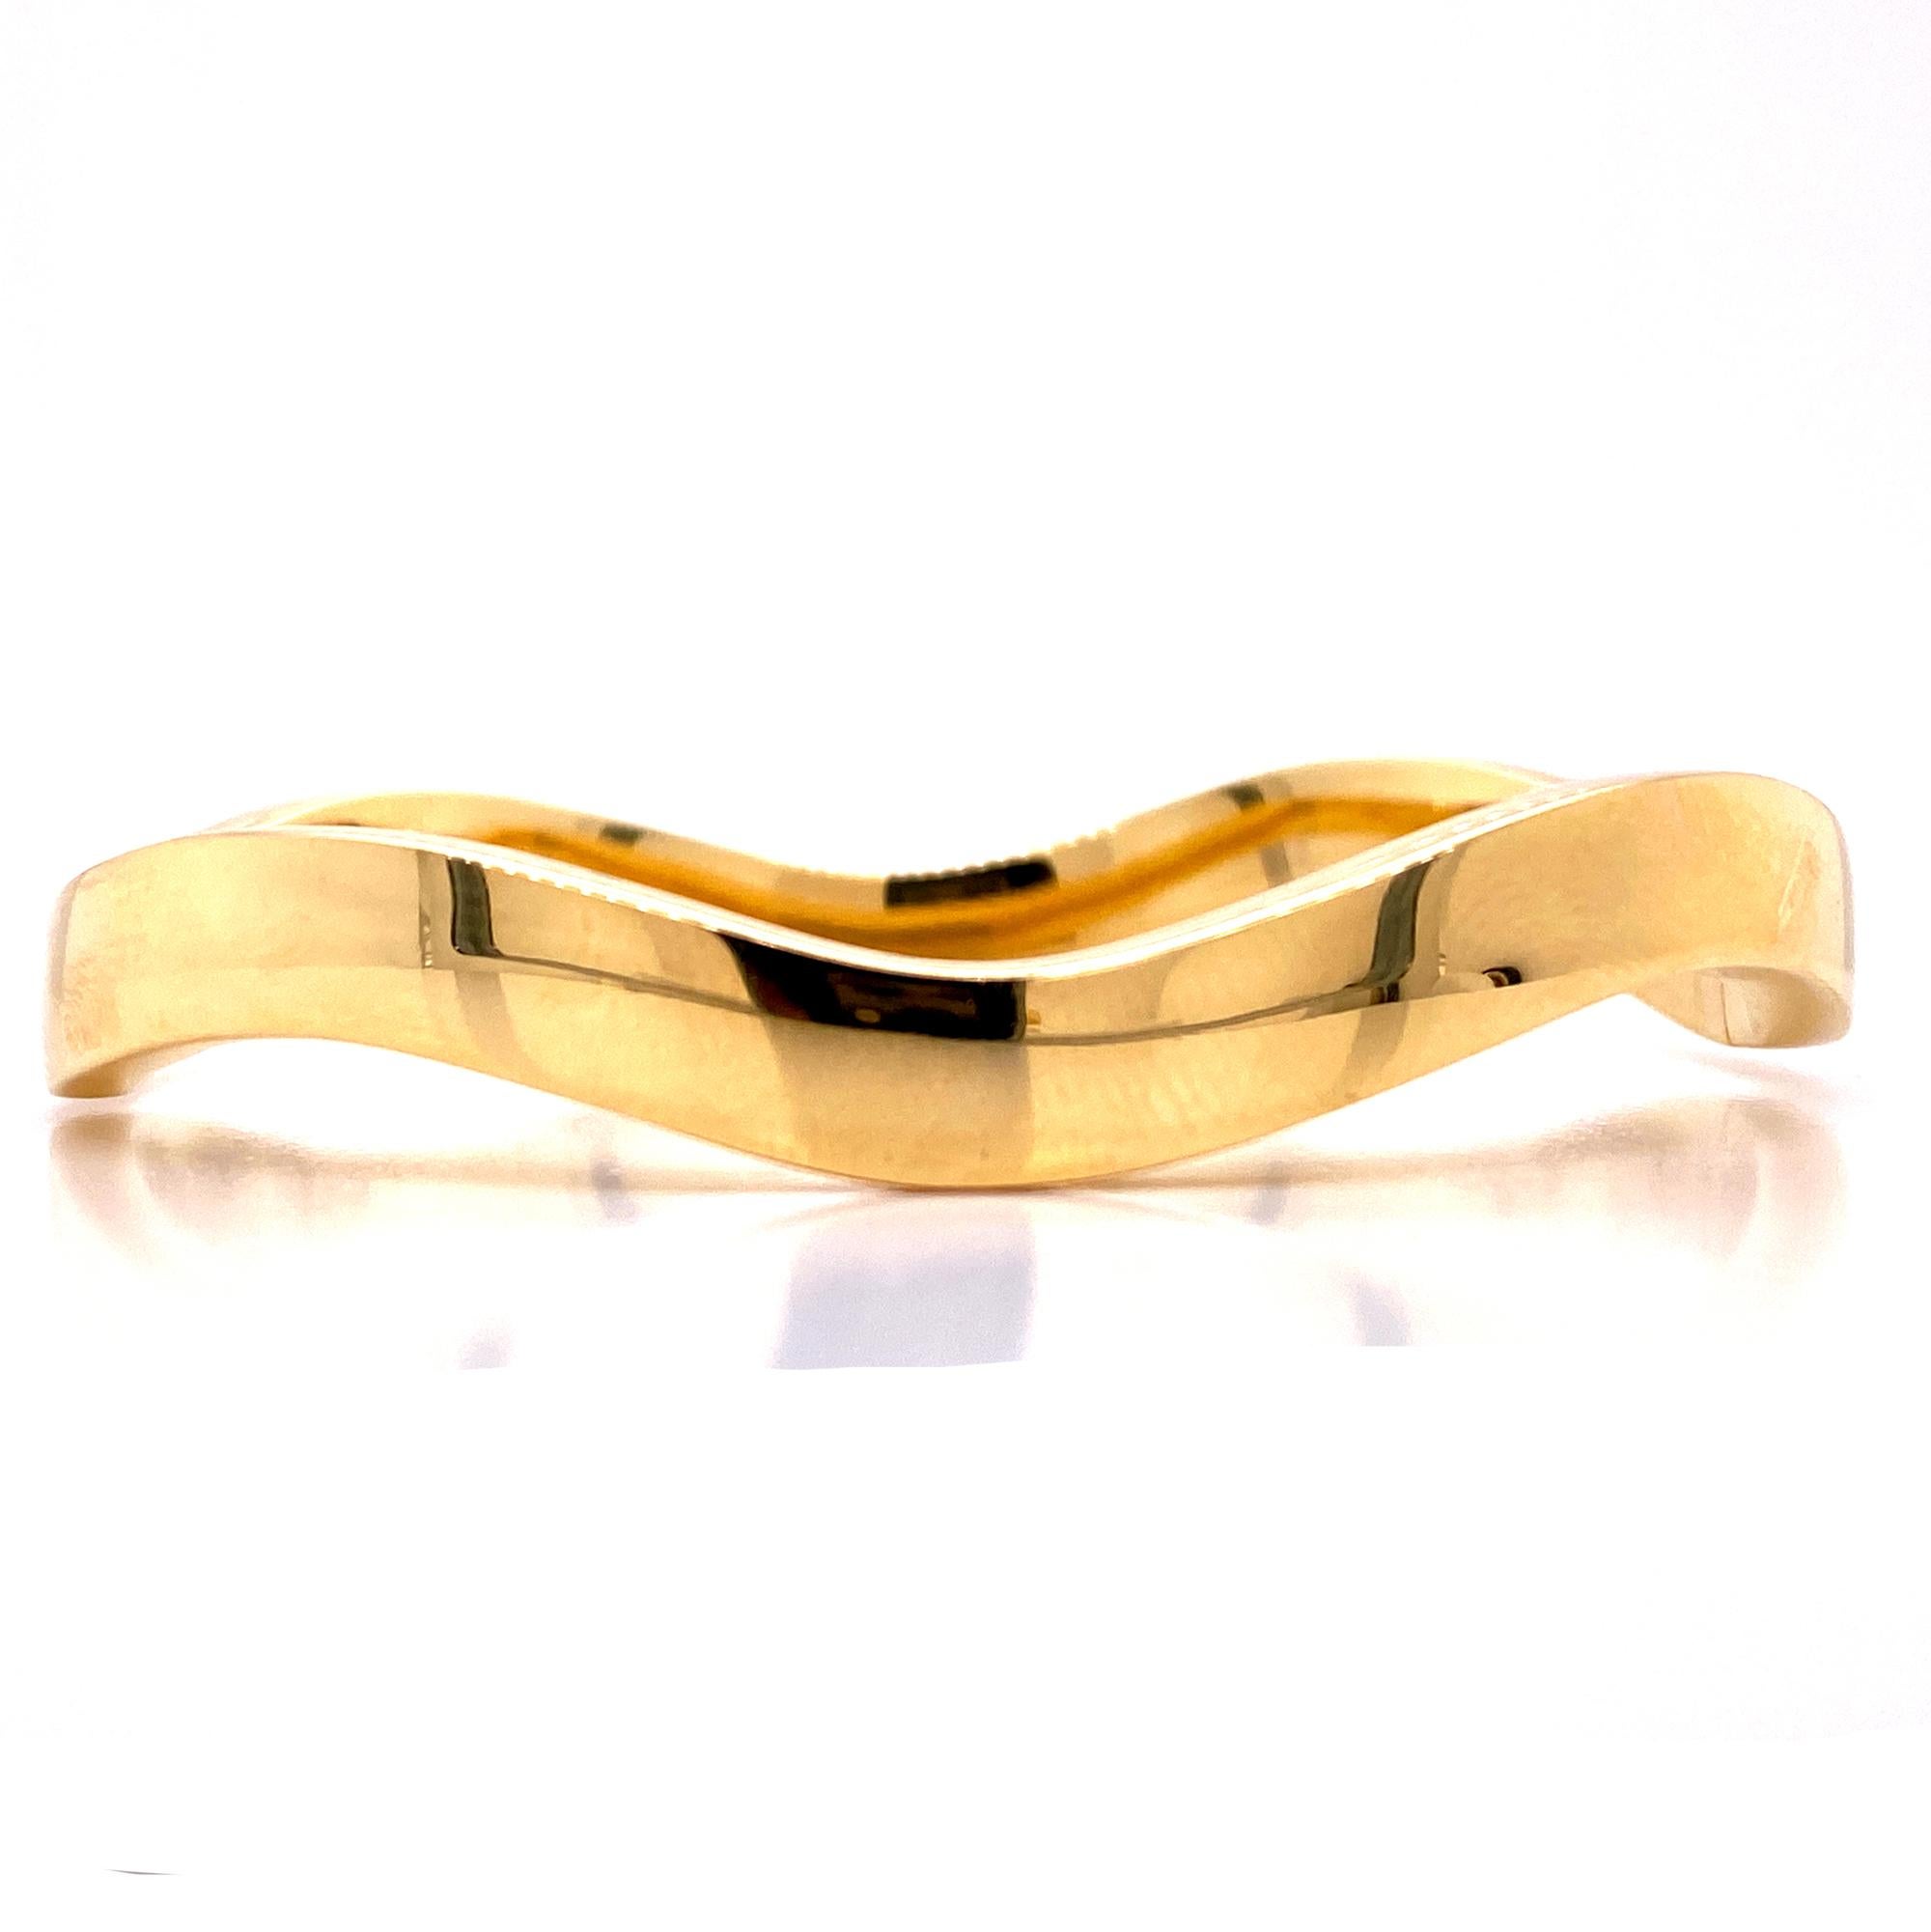 Beautiful 18 karat yellow gold wave bangle by Tiffany & Co. Italy. The bangle measures 6.8mm in width, 2.3 inches  in diameter, and 7 inches in circumference. Signed Italy Tiffany & Co. 750